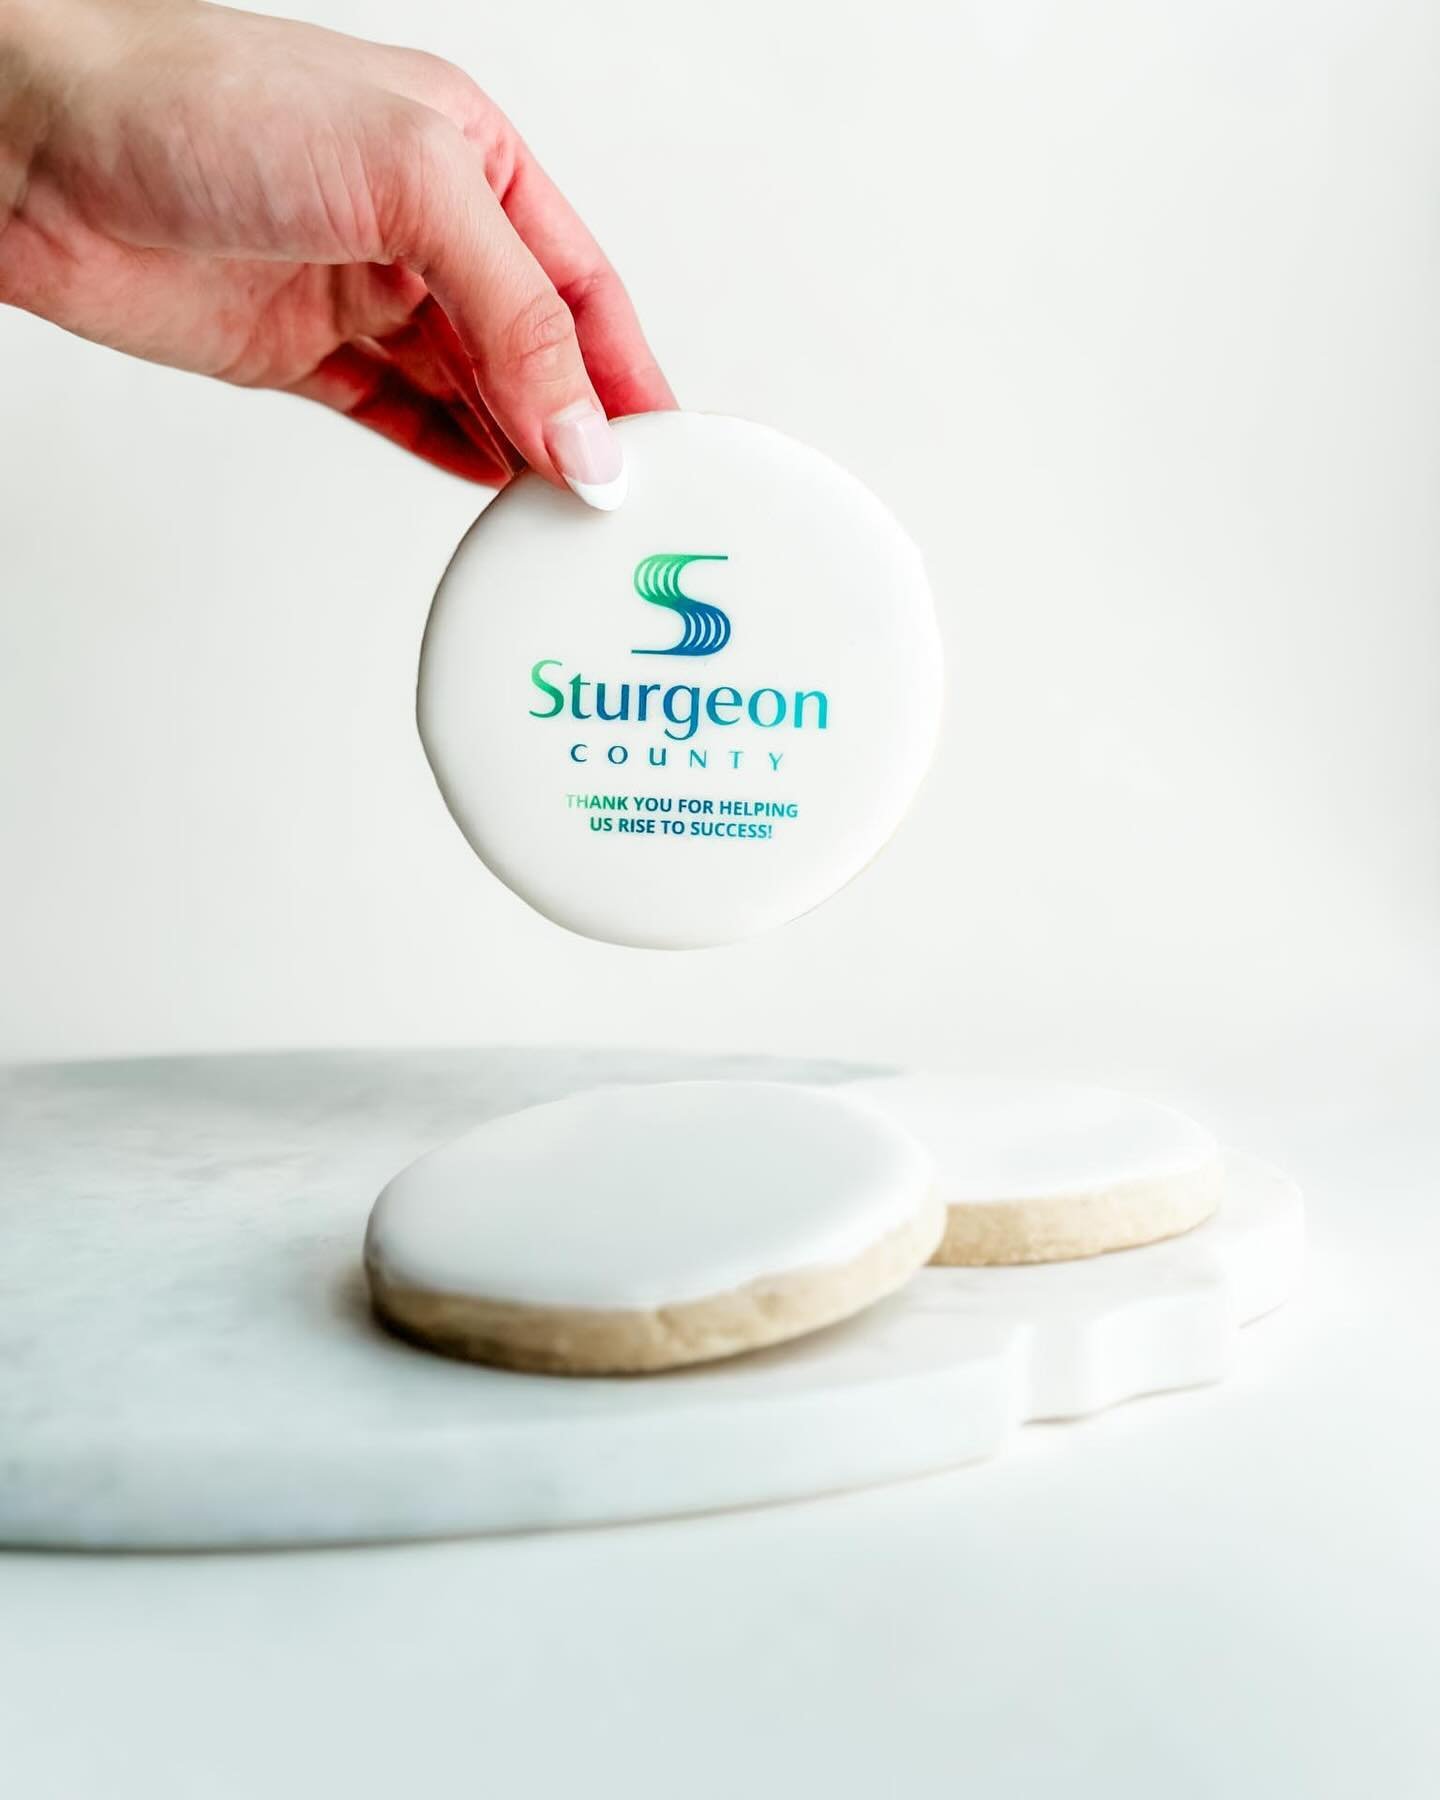 Putting beautiful logos in the spotlight, one delicious cookie at a time! 🌟 Thank you @sturgeoncounty for the opportunity to customise cookies with your lovely logo. 

Visit our website (linked in the bio) for complete listings of our many corporate